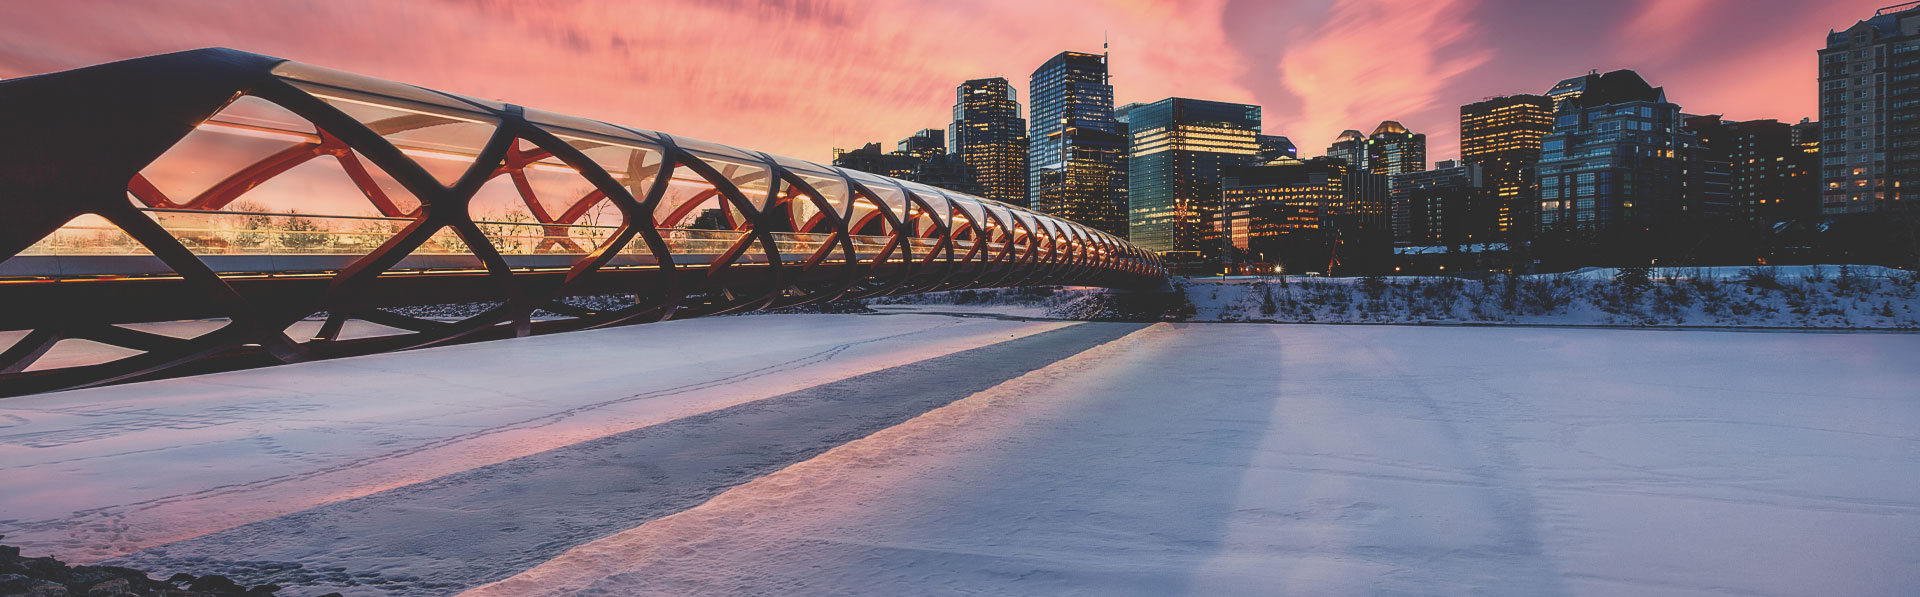 The Peace Bridge in Calgary over the frozen Bow River during Winter